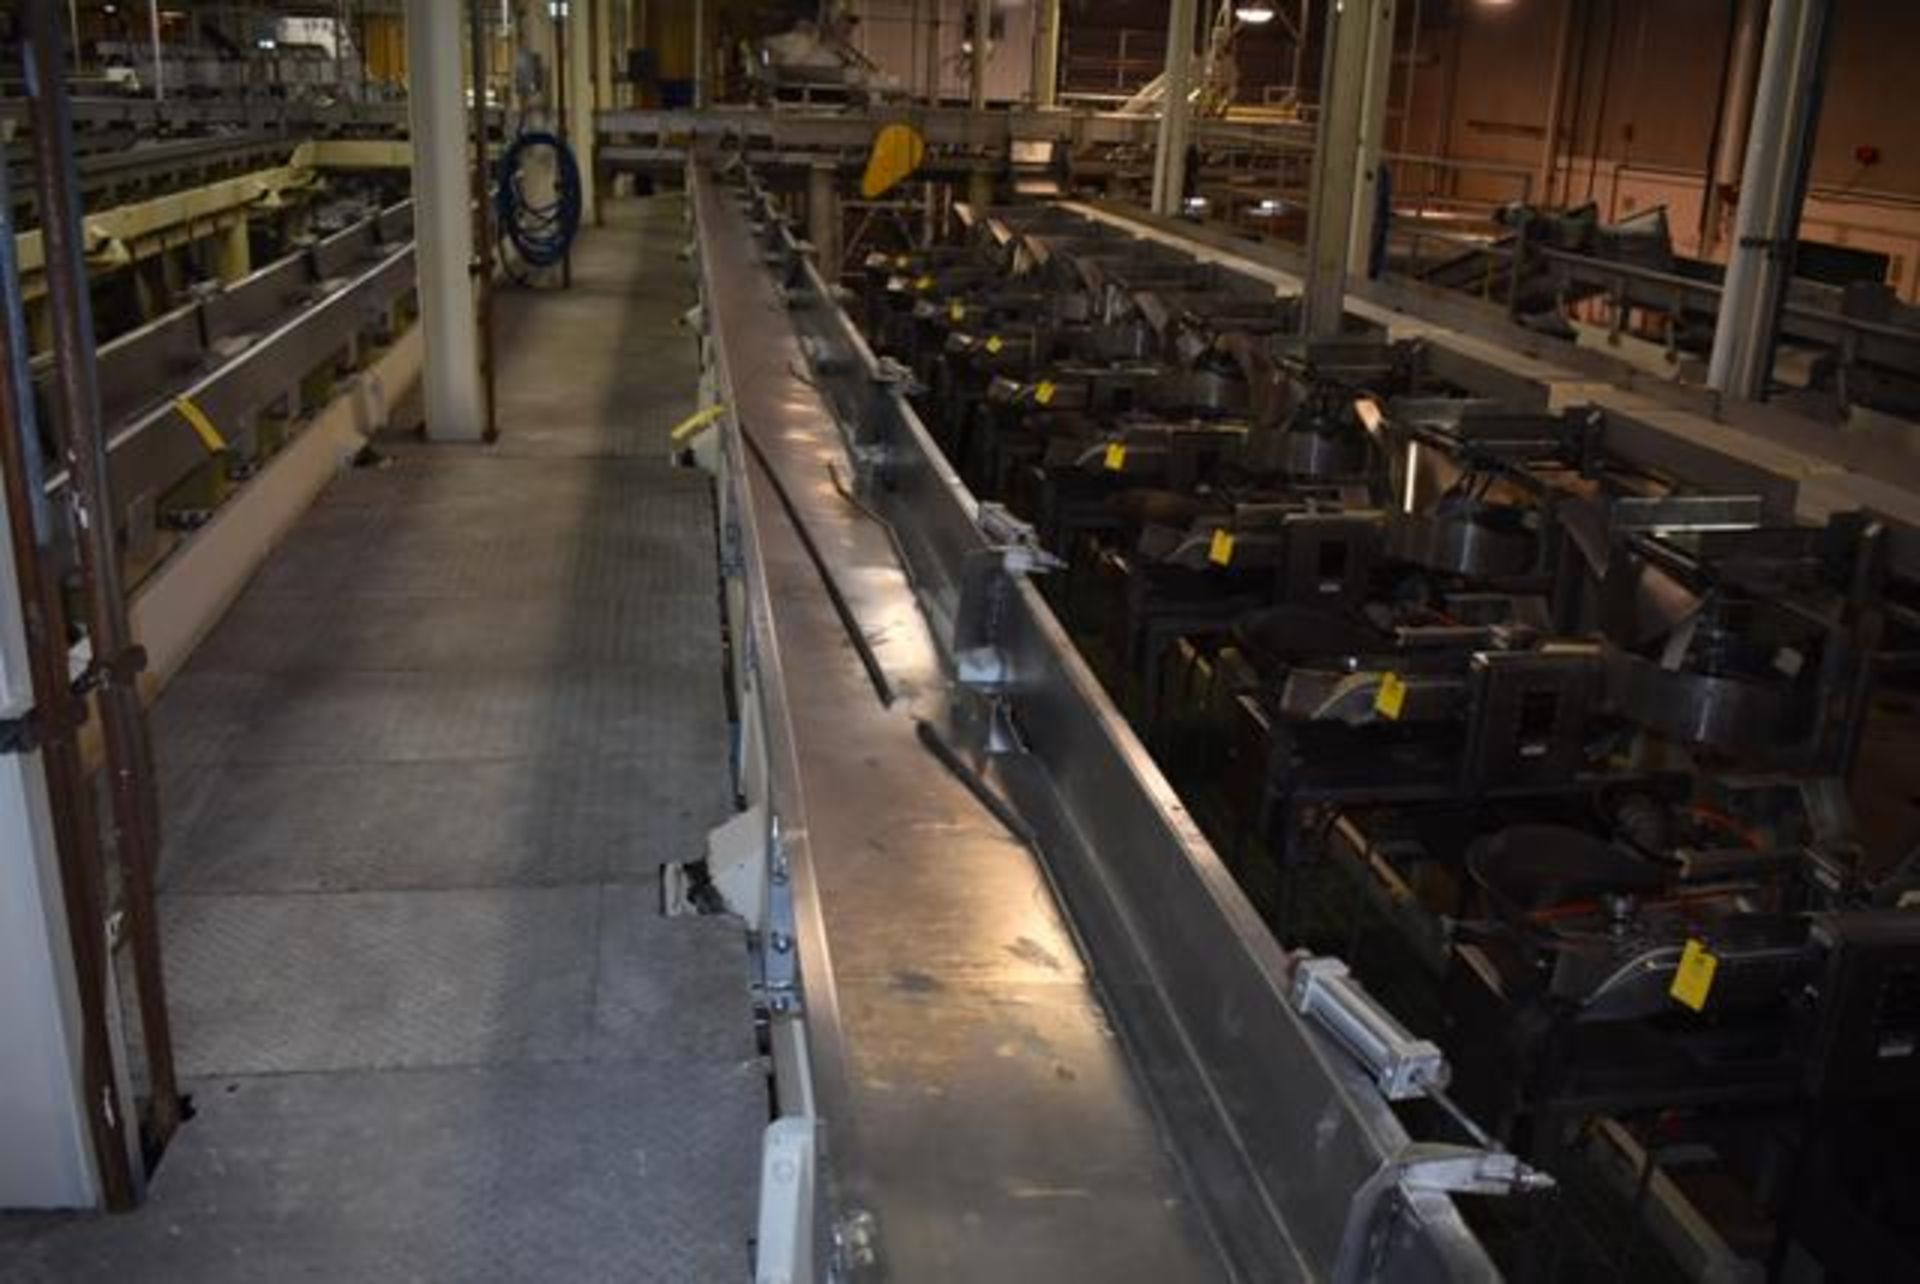 (Located in Sleepy Eye, MN) Commercial Vibratory Oscillating Shaker Conveyor, Approx. 72' Length x - Image 2 of 2